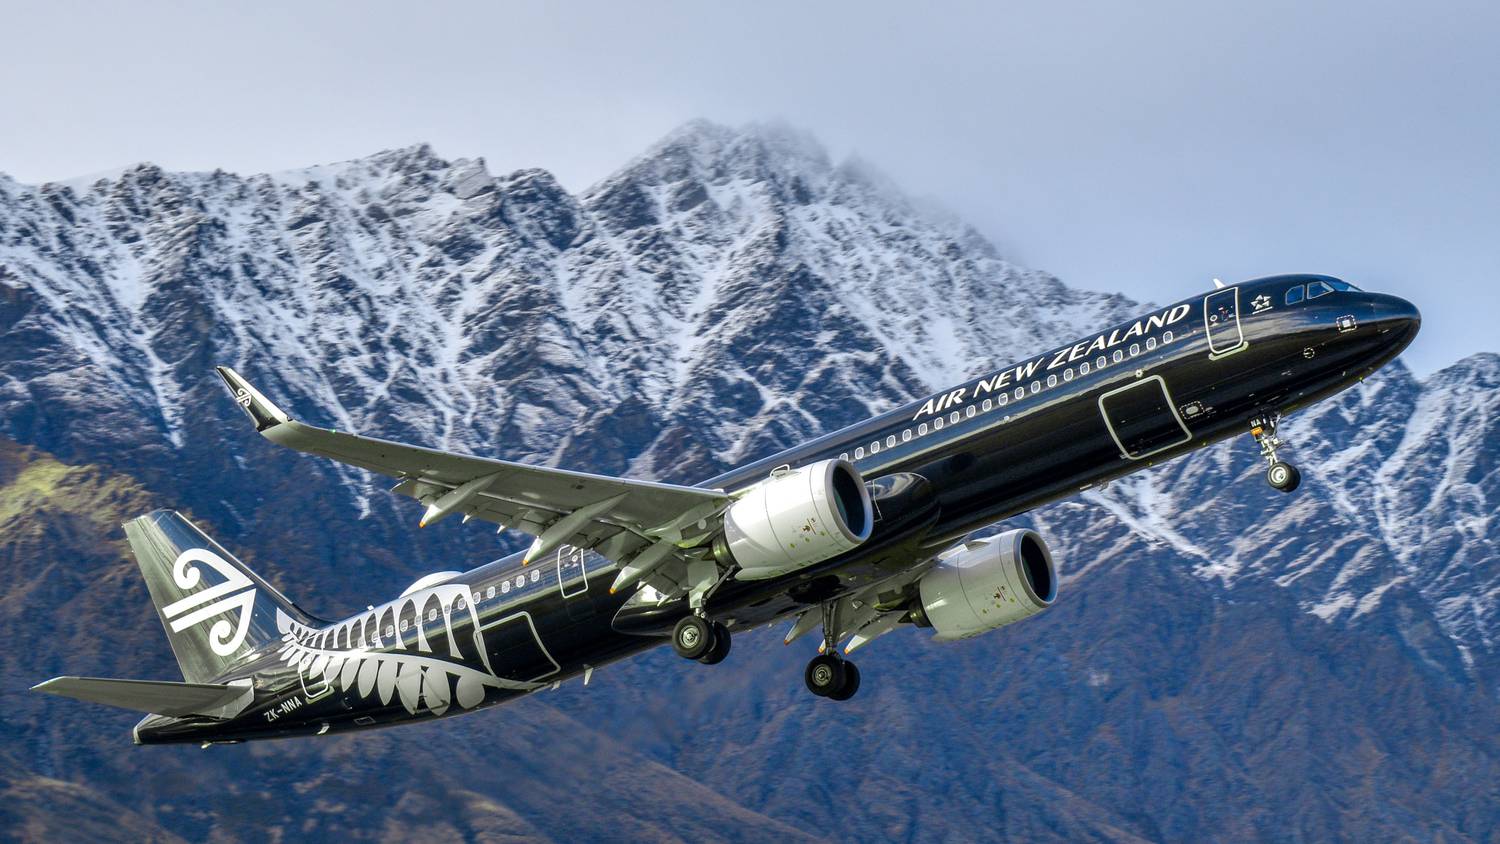 https://static1.simpleflyingimages.com/wordpress/wp-content/uploads/2022/08/A321_takeoff_Queenstown_ZK-NNA.jpg?q=50&fit=contain&w=1500&h=&dpr=1.5